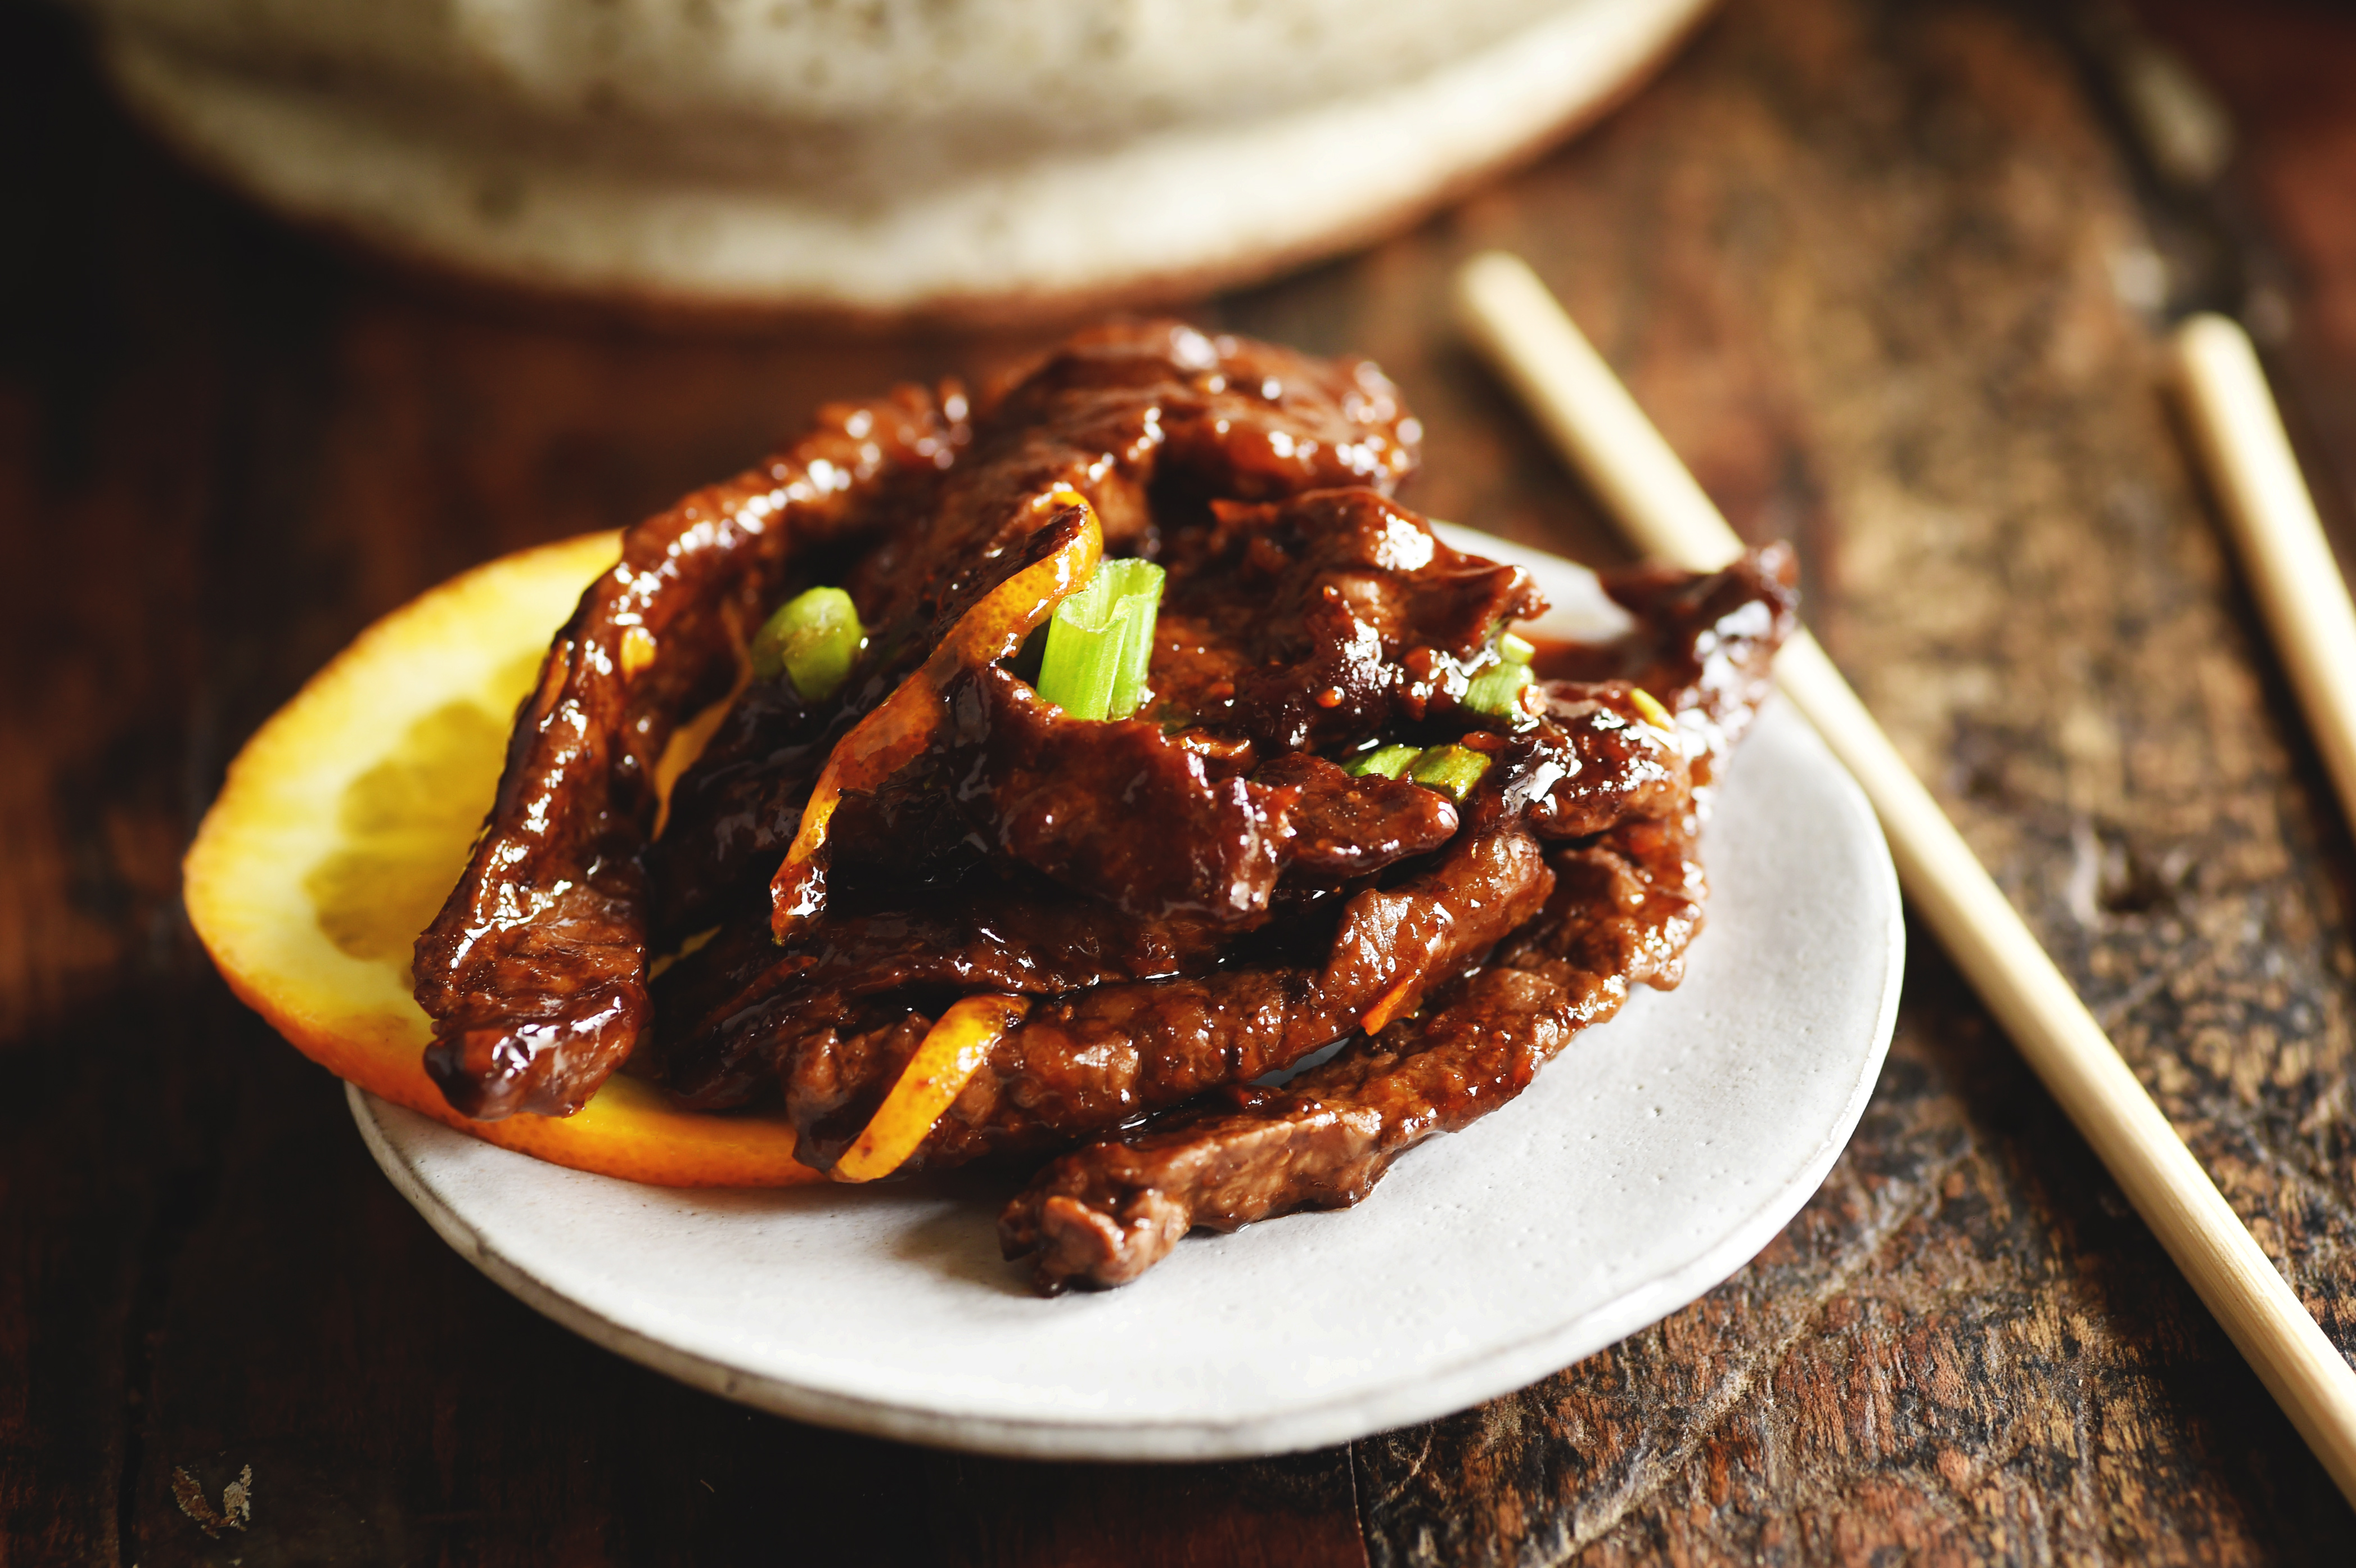 Orange Beef - Low-Carb Chinese Food Recipe served on a plate with chopsticks.